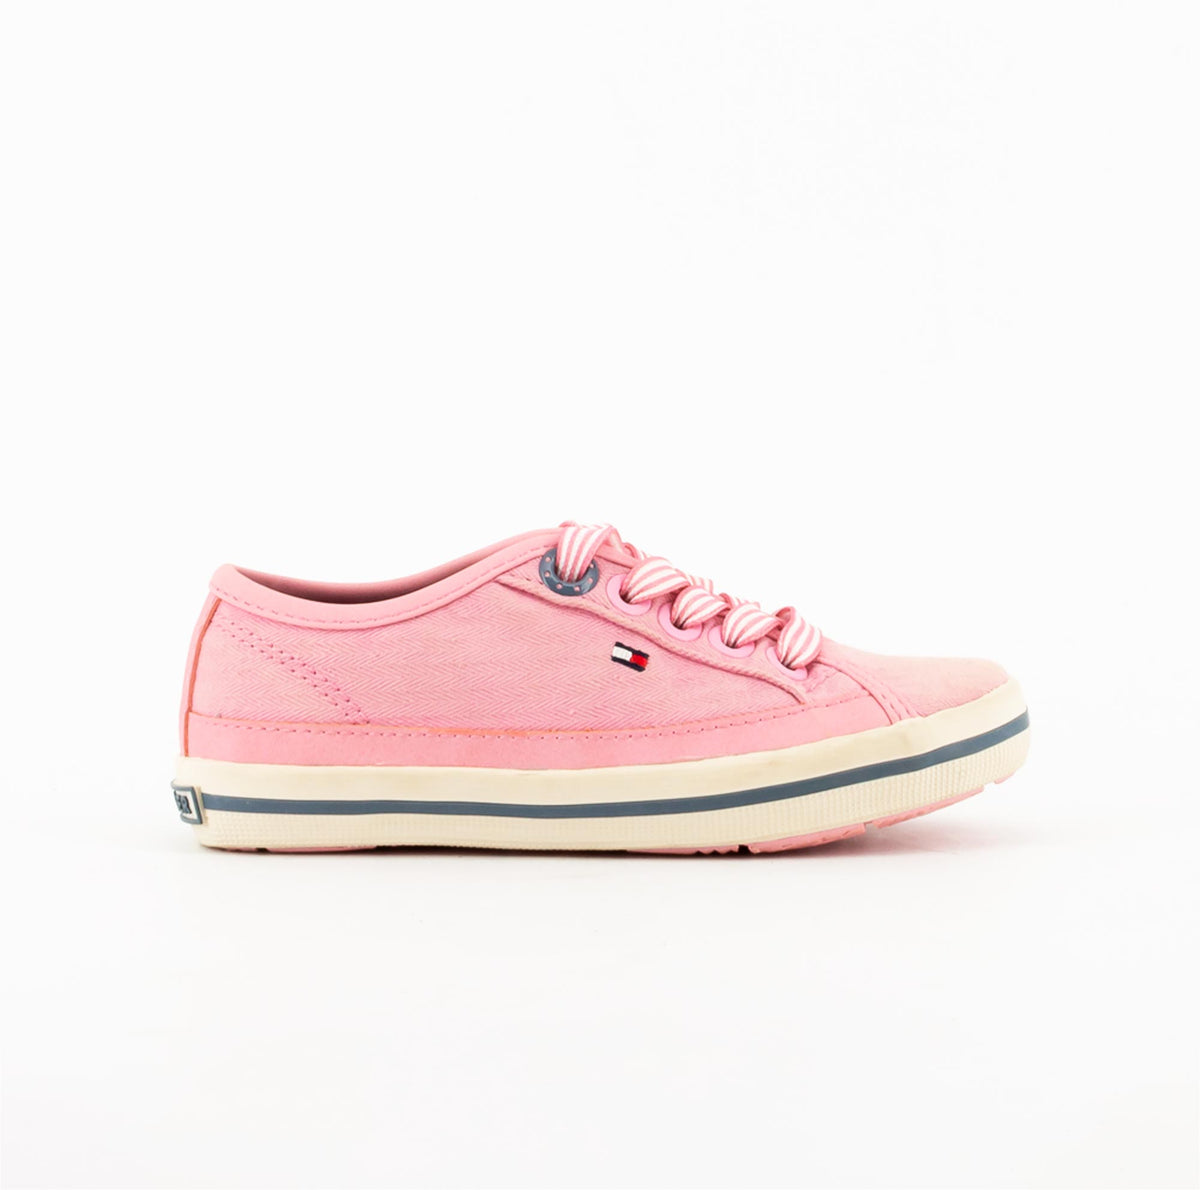 TOMMY HILFIGER | Sneakers Bambina | FG0FG00109